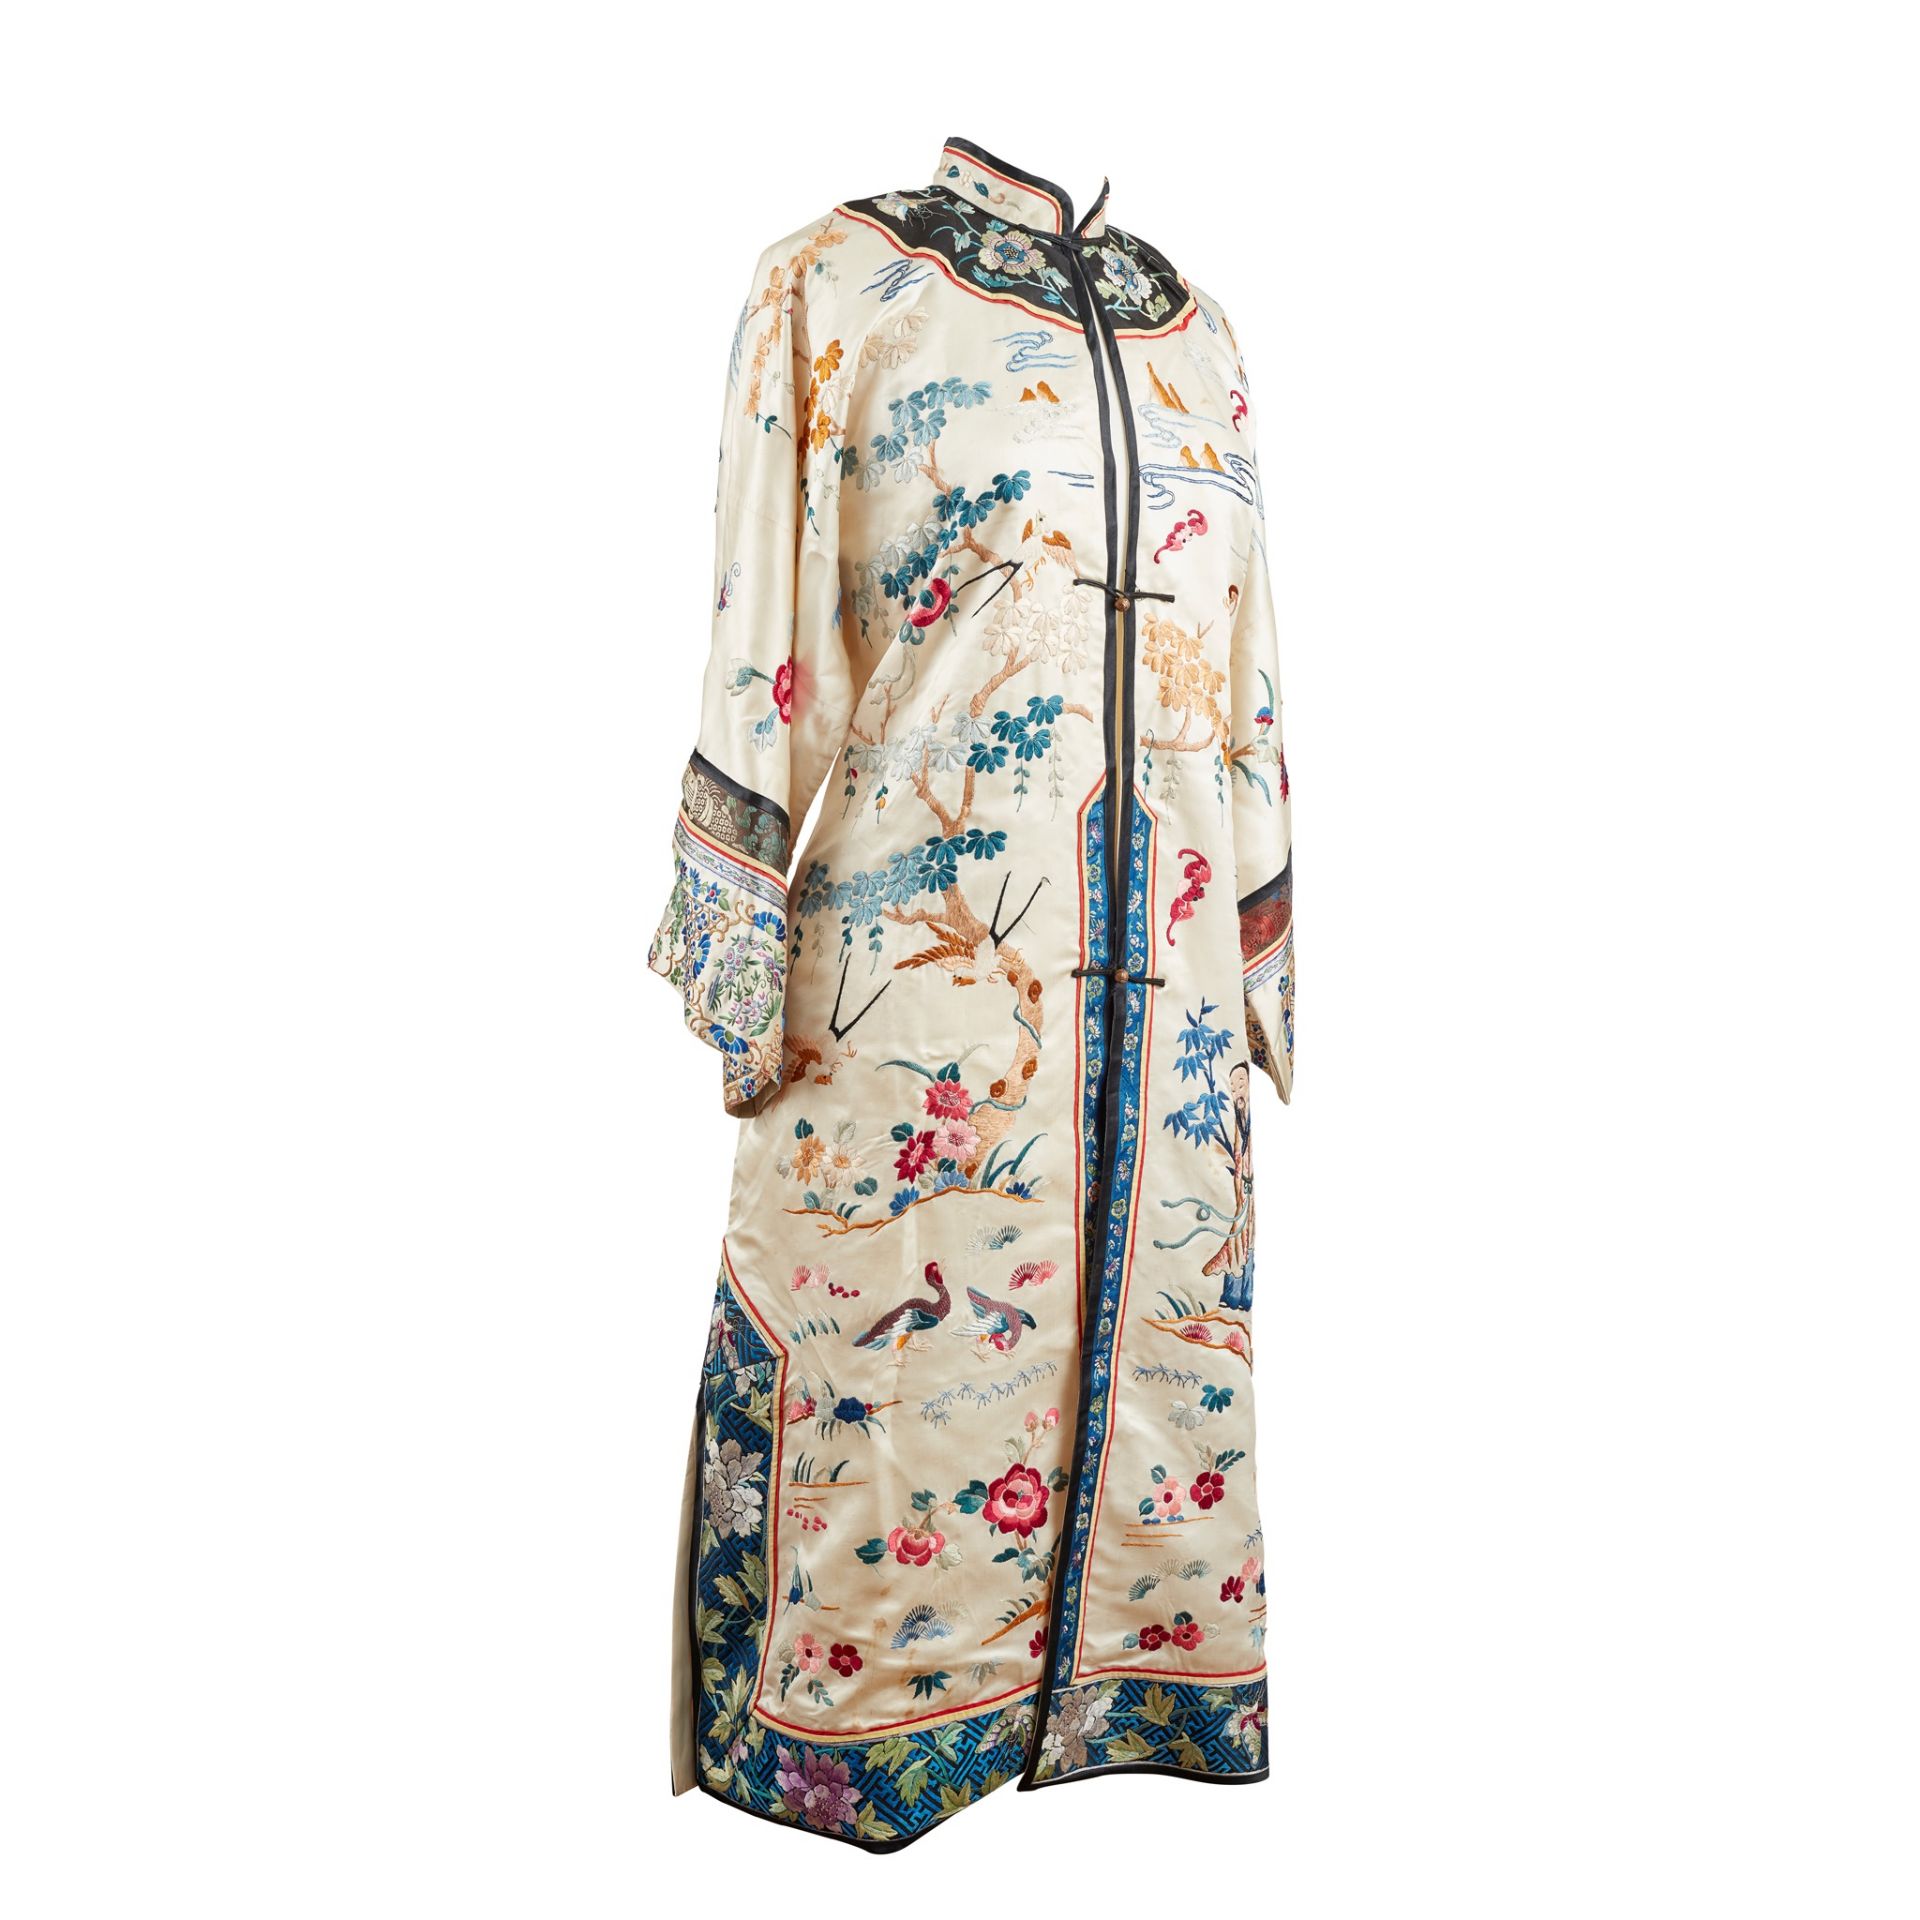 IVORY GROUND SILK EMBROIDERED LADY'S ROBE LATE QING DYNASTY-REPUBLIC PERIOD, 19TH-20TH CENTURY